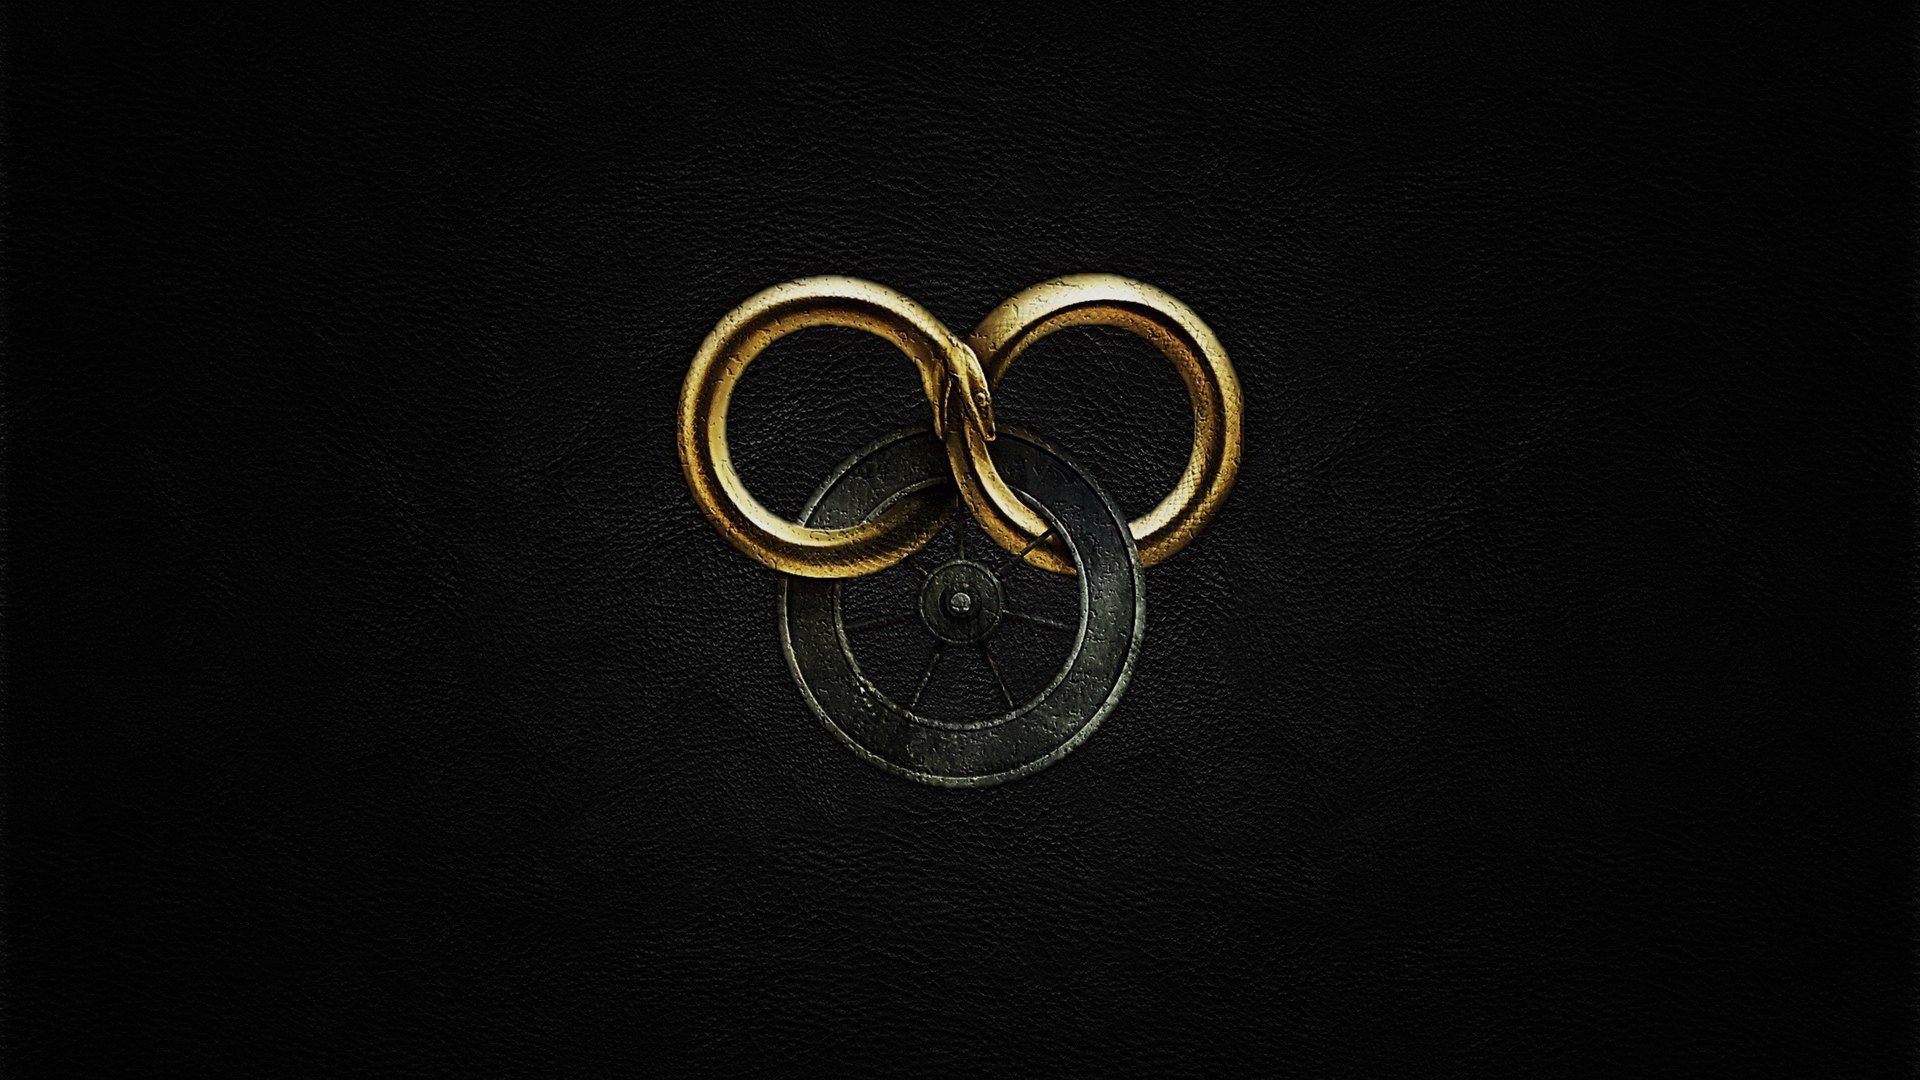 The Wheel of Time, Minimalism Wallpaper